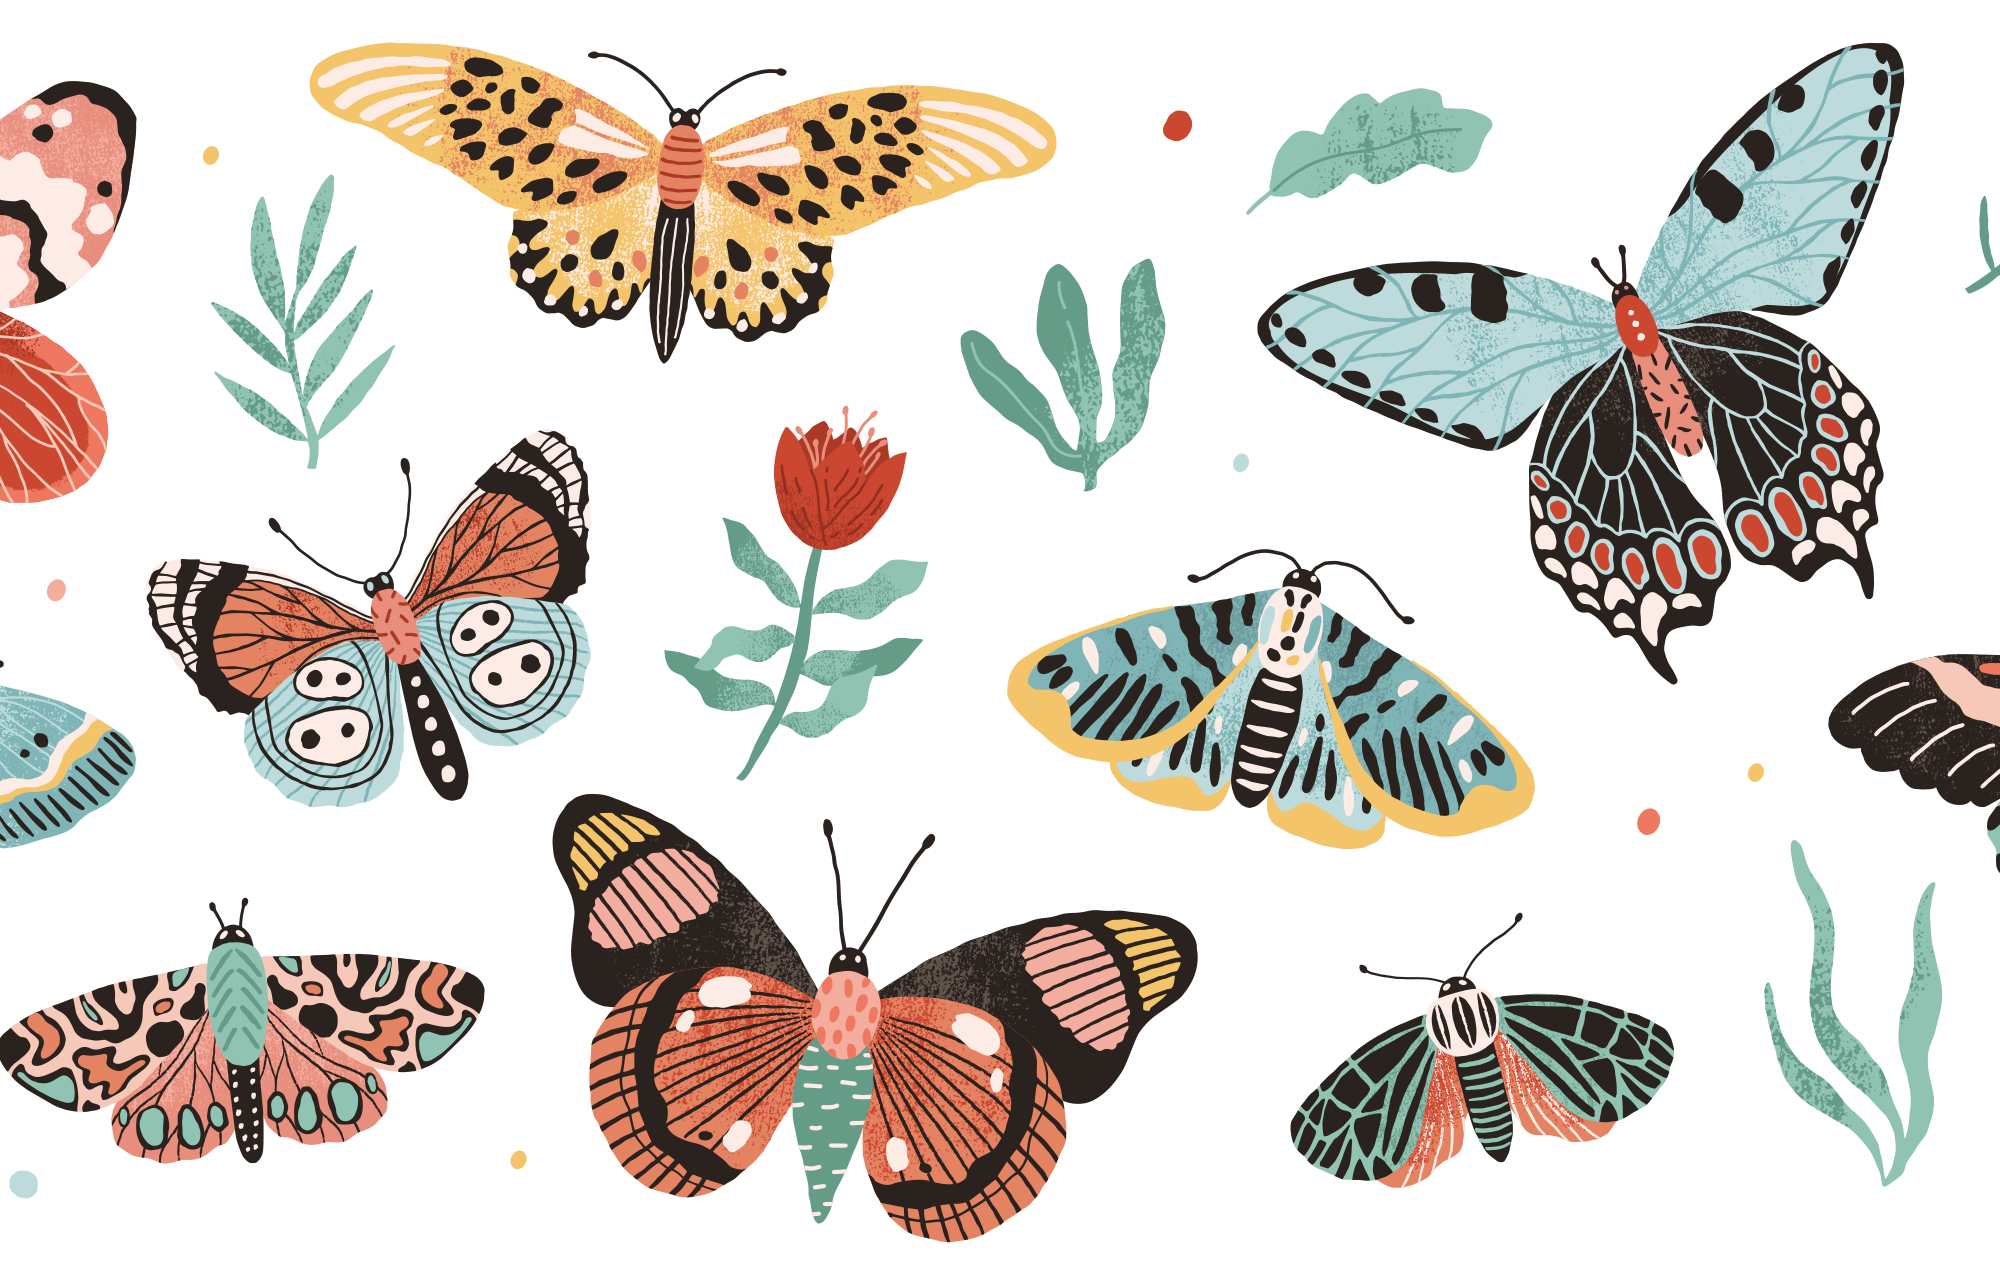 Illustration of green, yellow, red, and black butterflies and moths surrounding red tulip flowers and leaves.